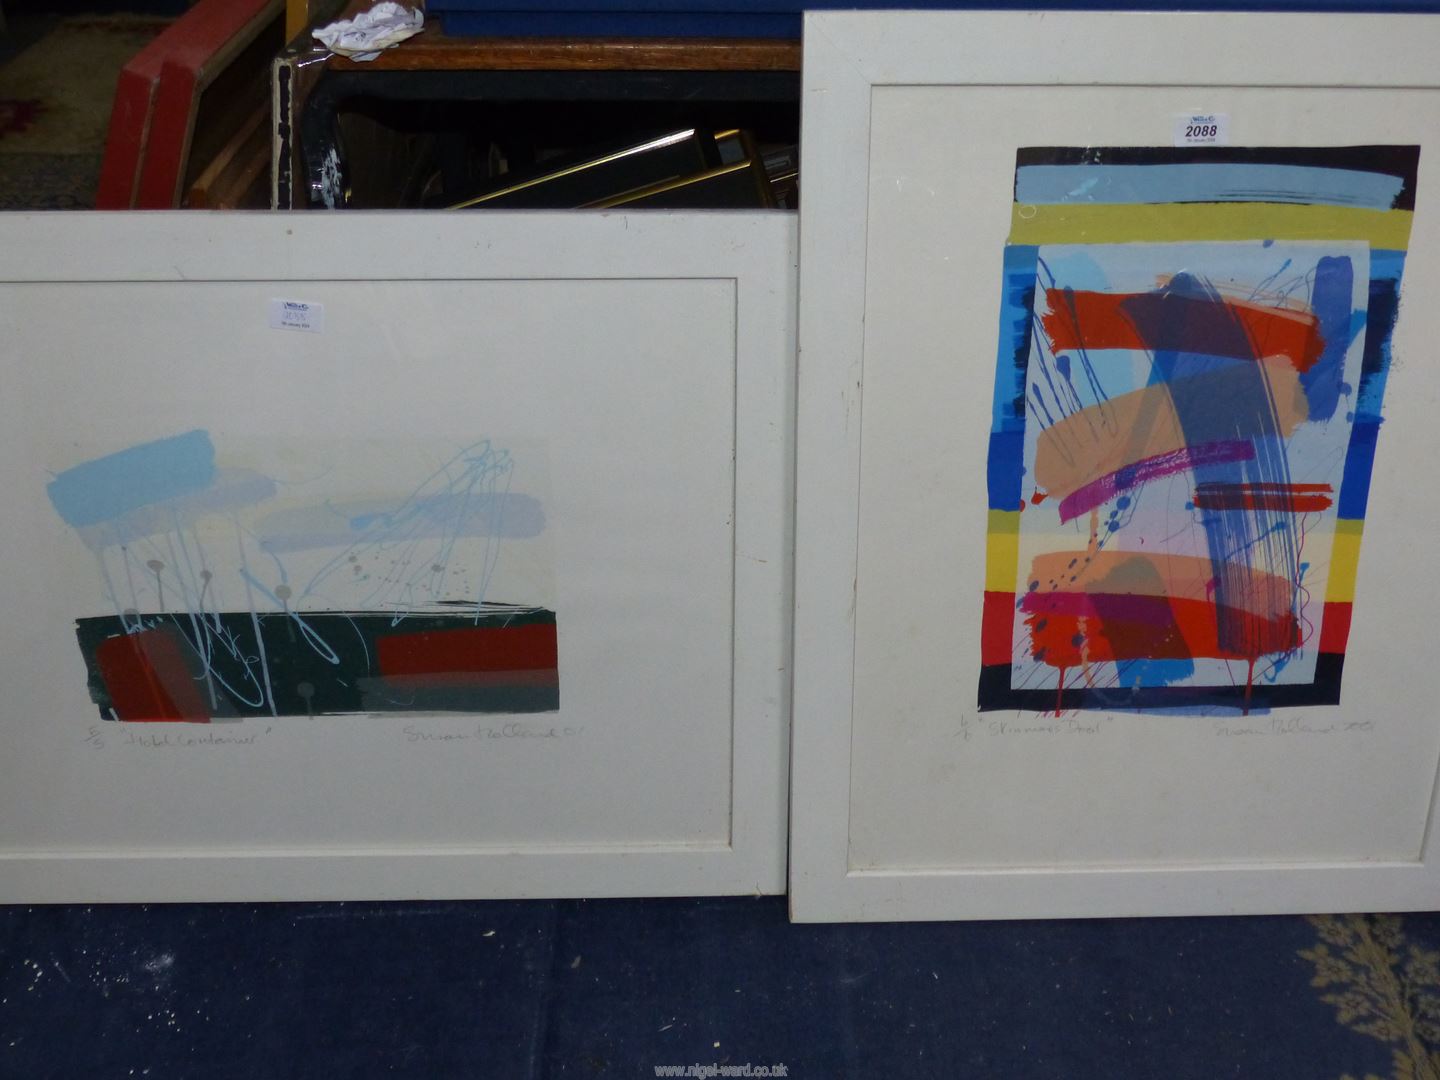 A pair of large framed limited Edition Prints including 'Hotel Container' no.